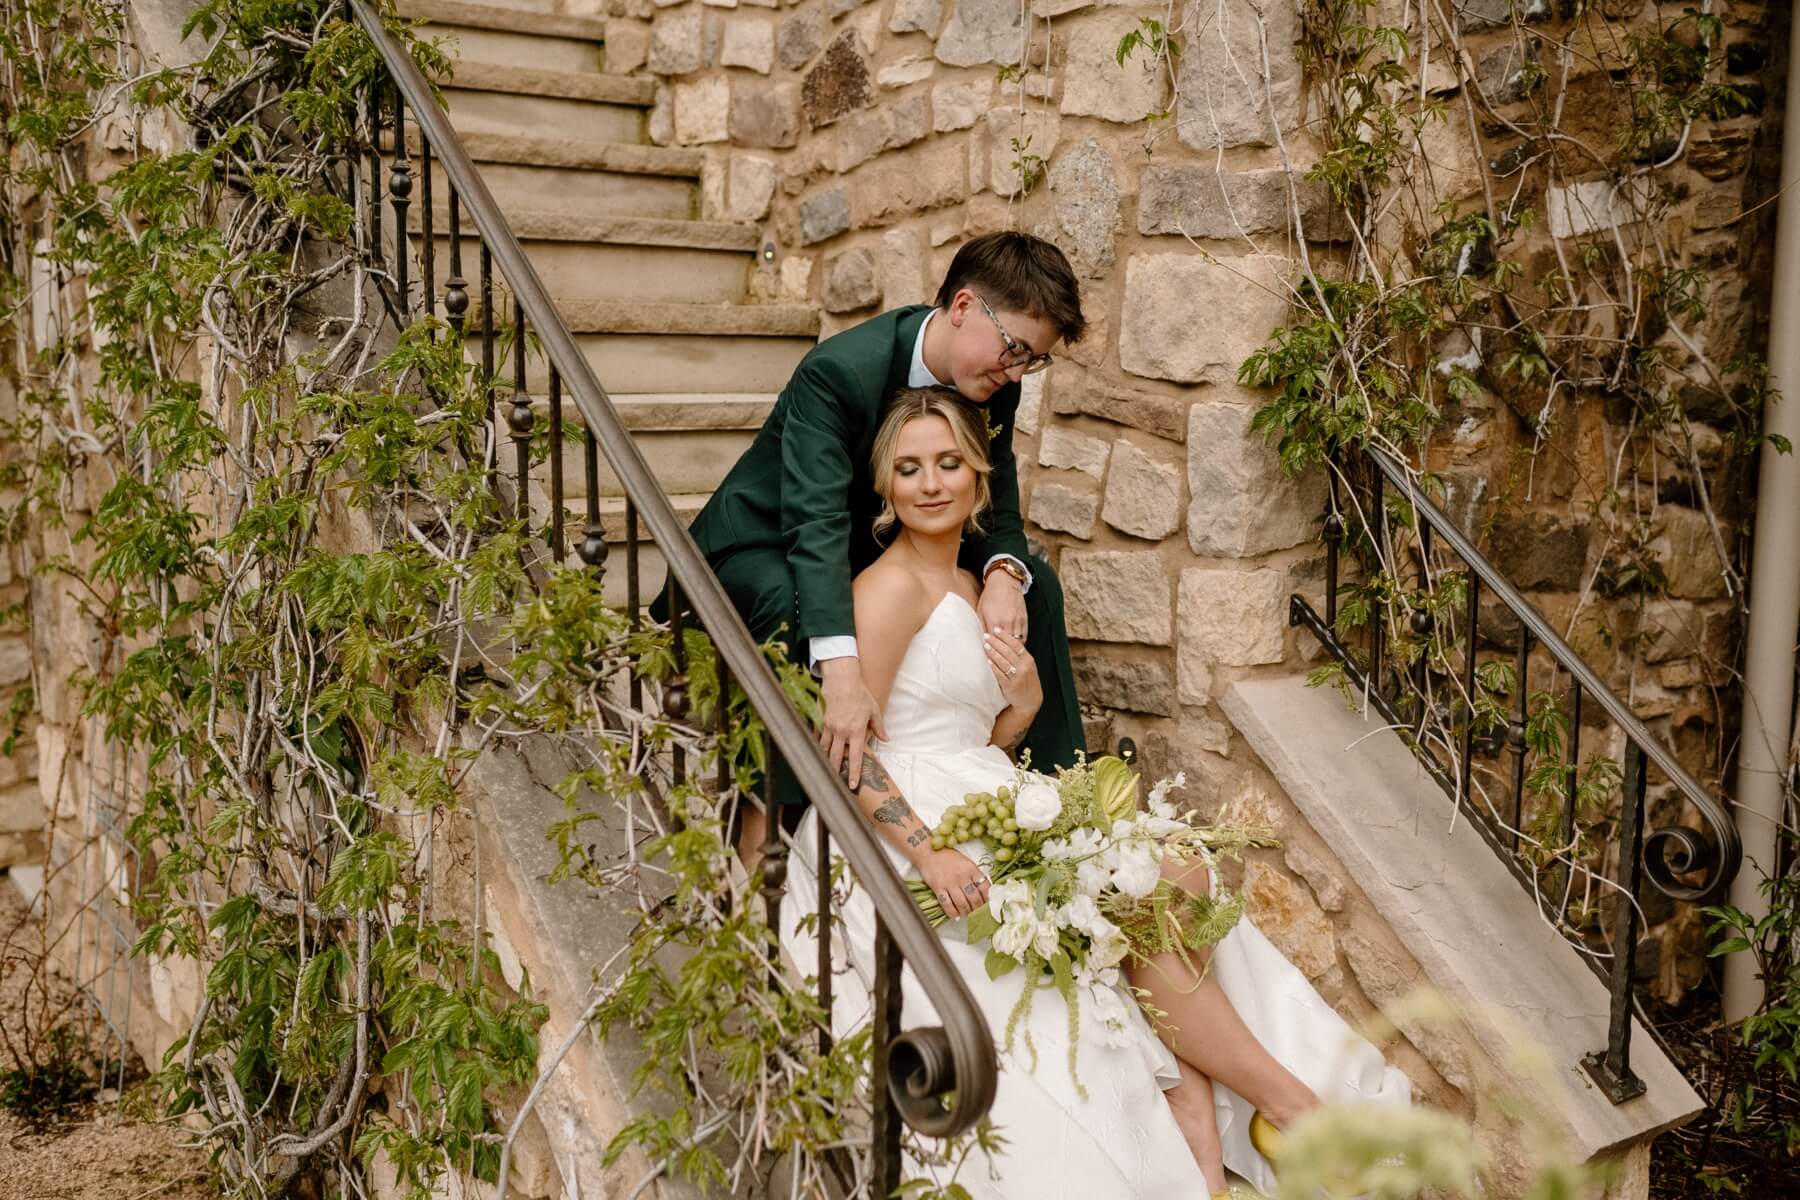 Couple sitting on stone steps in wedding dress and dark green suit